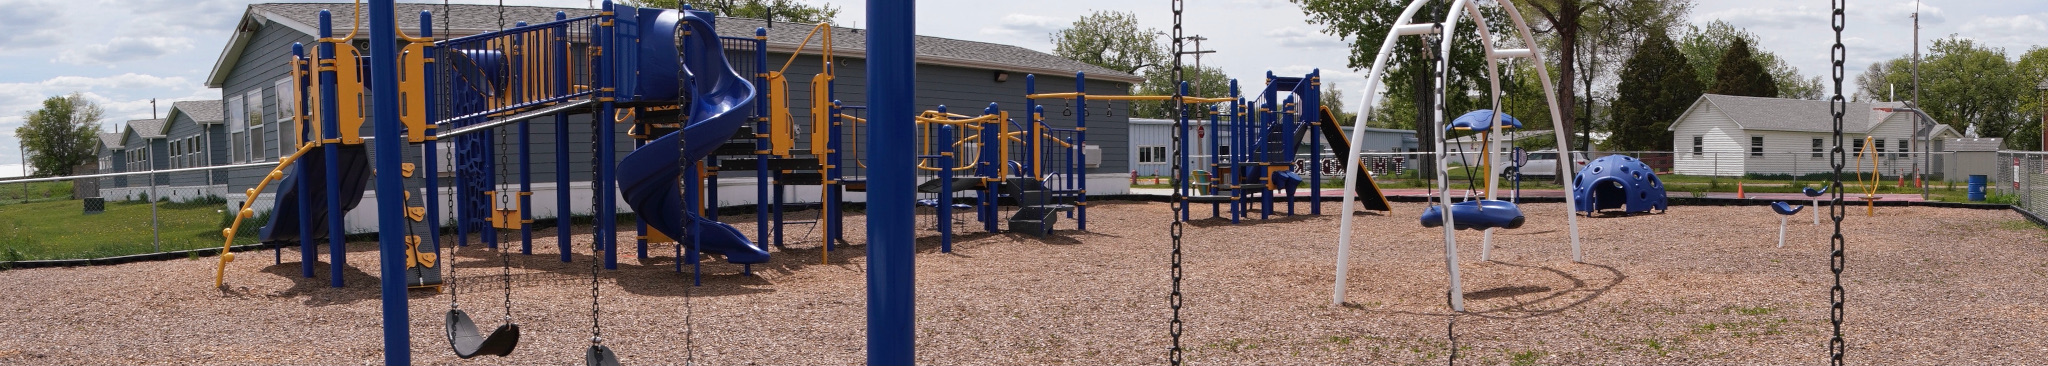 TJES Playground
              with RMC, Special Ed, Grades 4 - 6, Music and GnT and FACE
              buildings